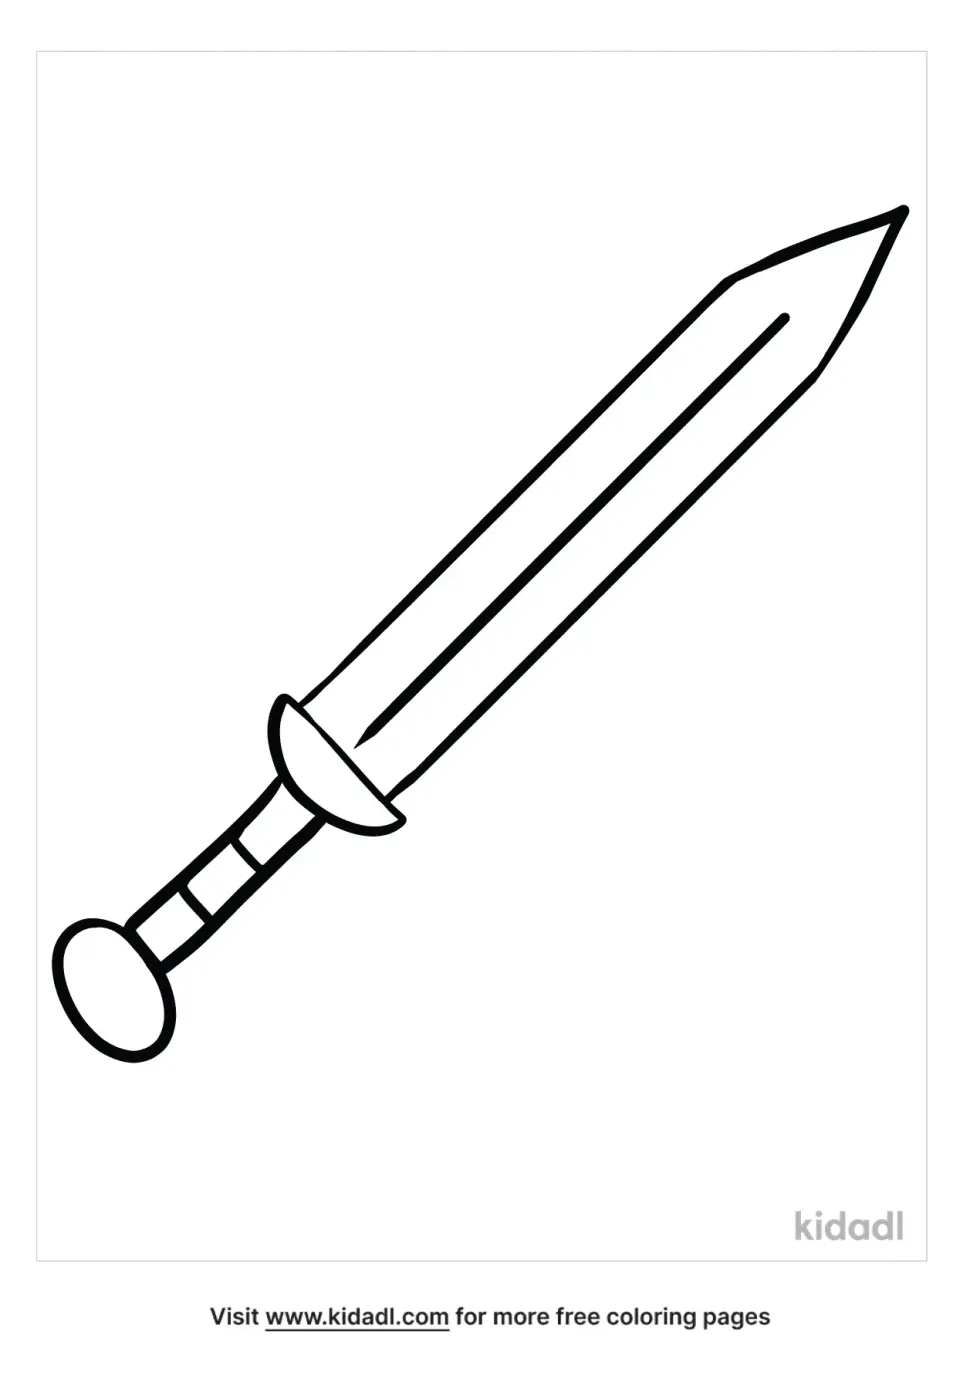 Roman Weapon Coloring Page